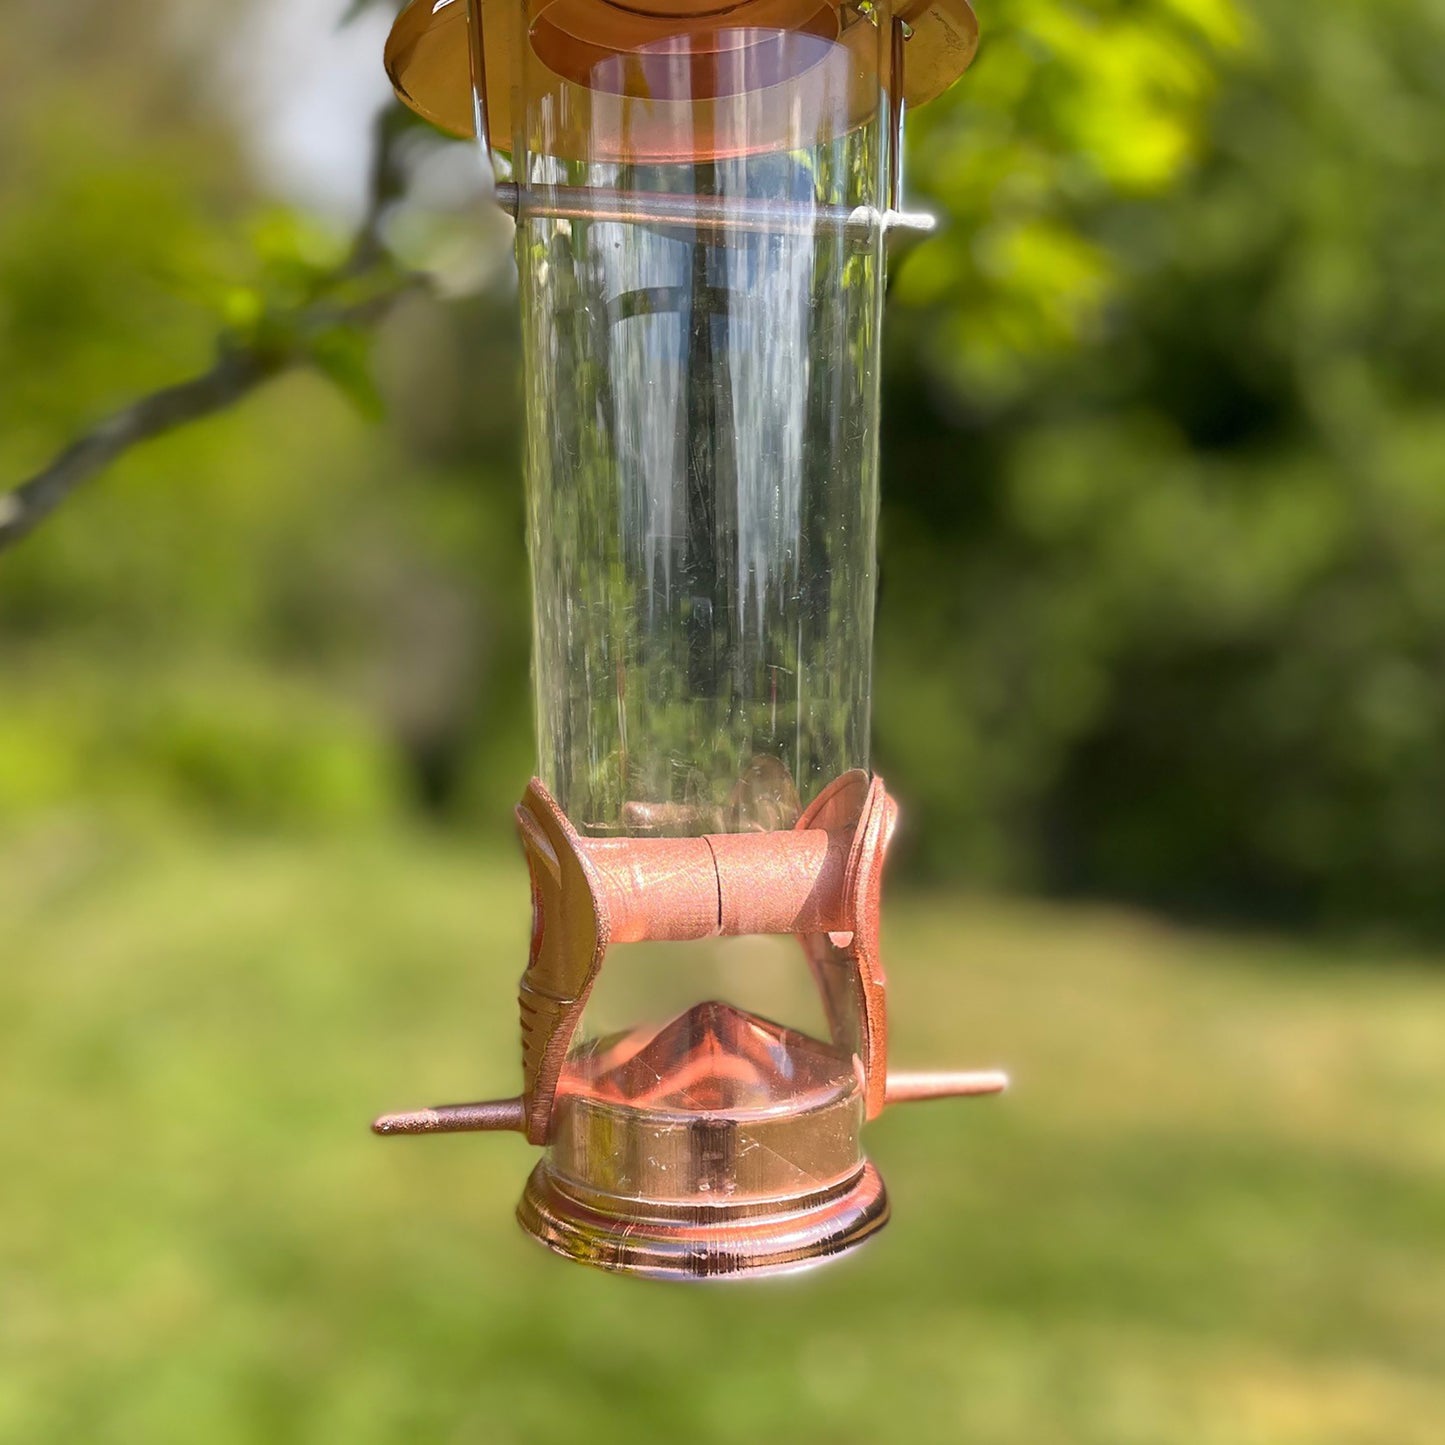 2 x Copper Style Hanging Bird Seed Feeders with 2 Feeding Ports